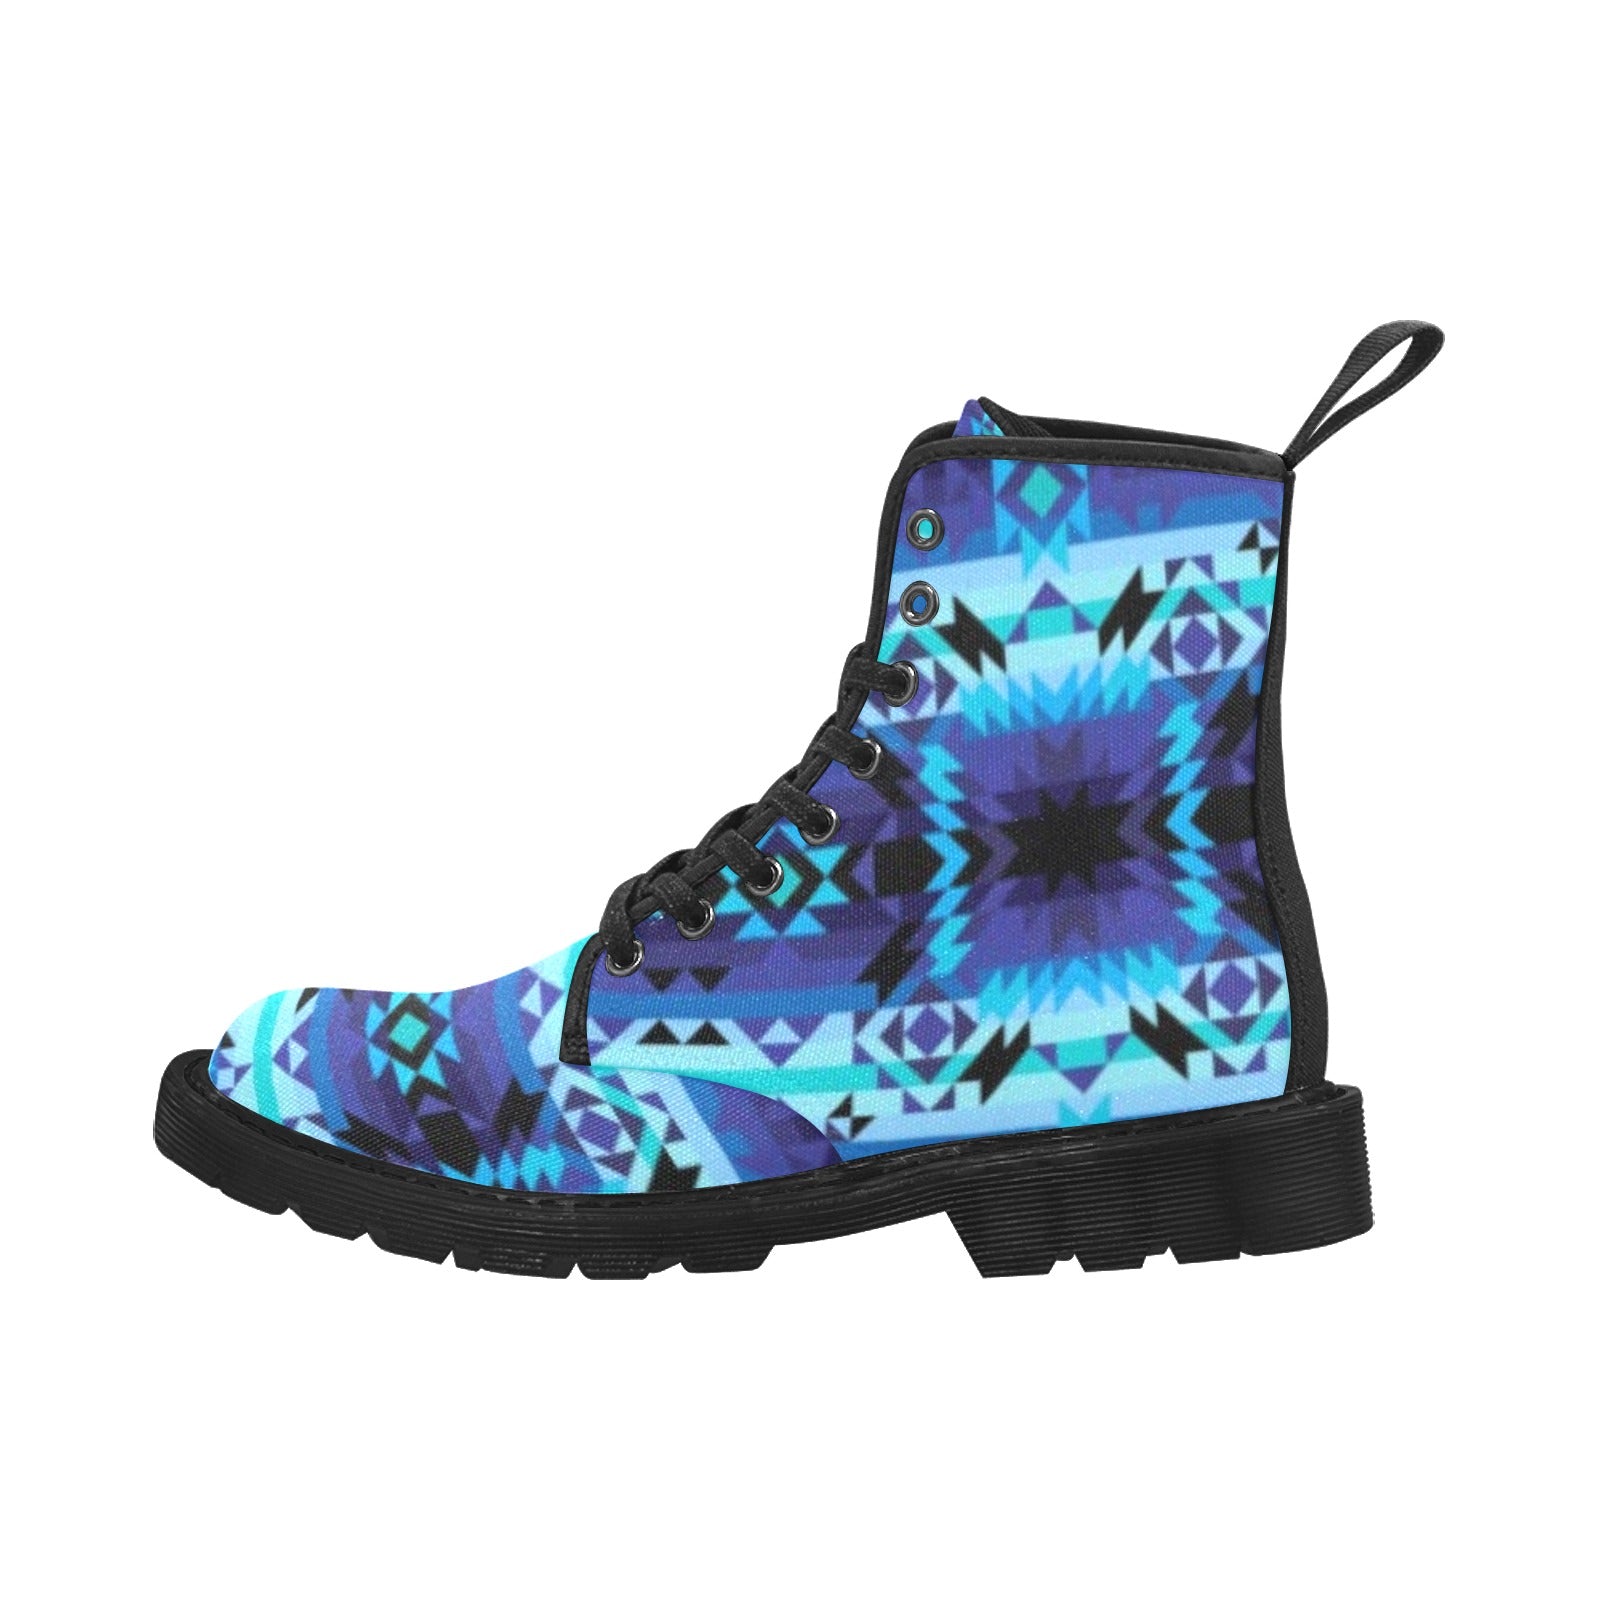 Blue Star Boots for Women (Black)